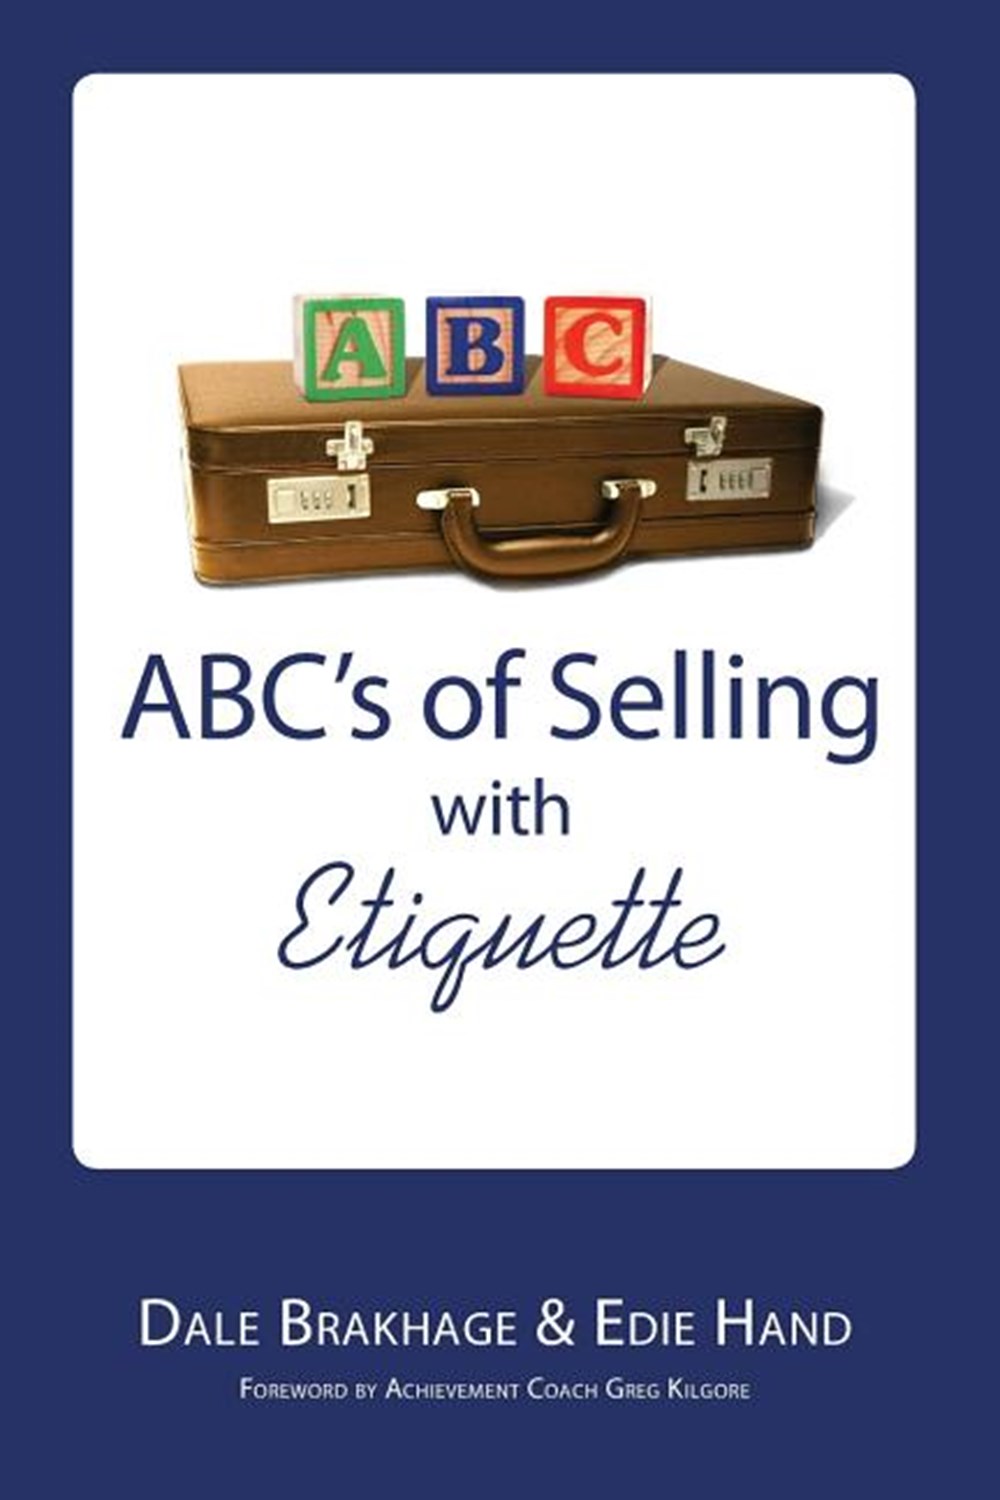 ABCs of Selling with Etiquette